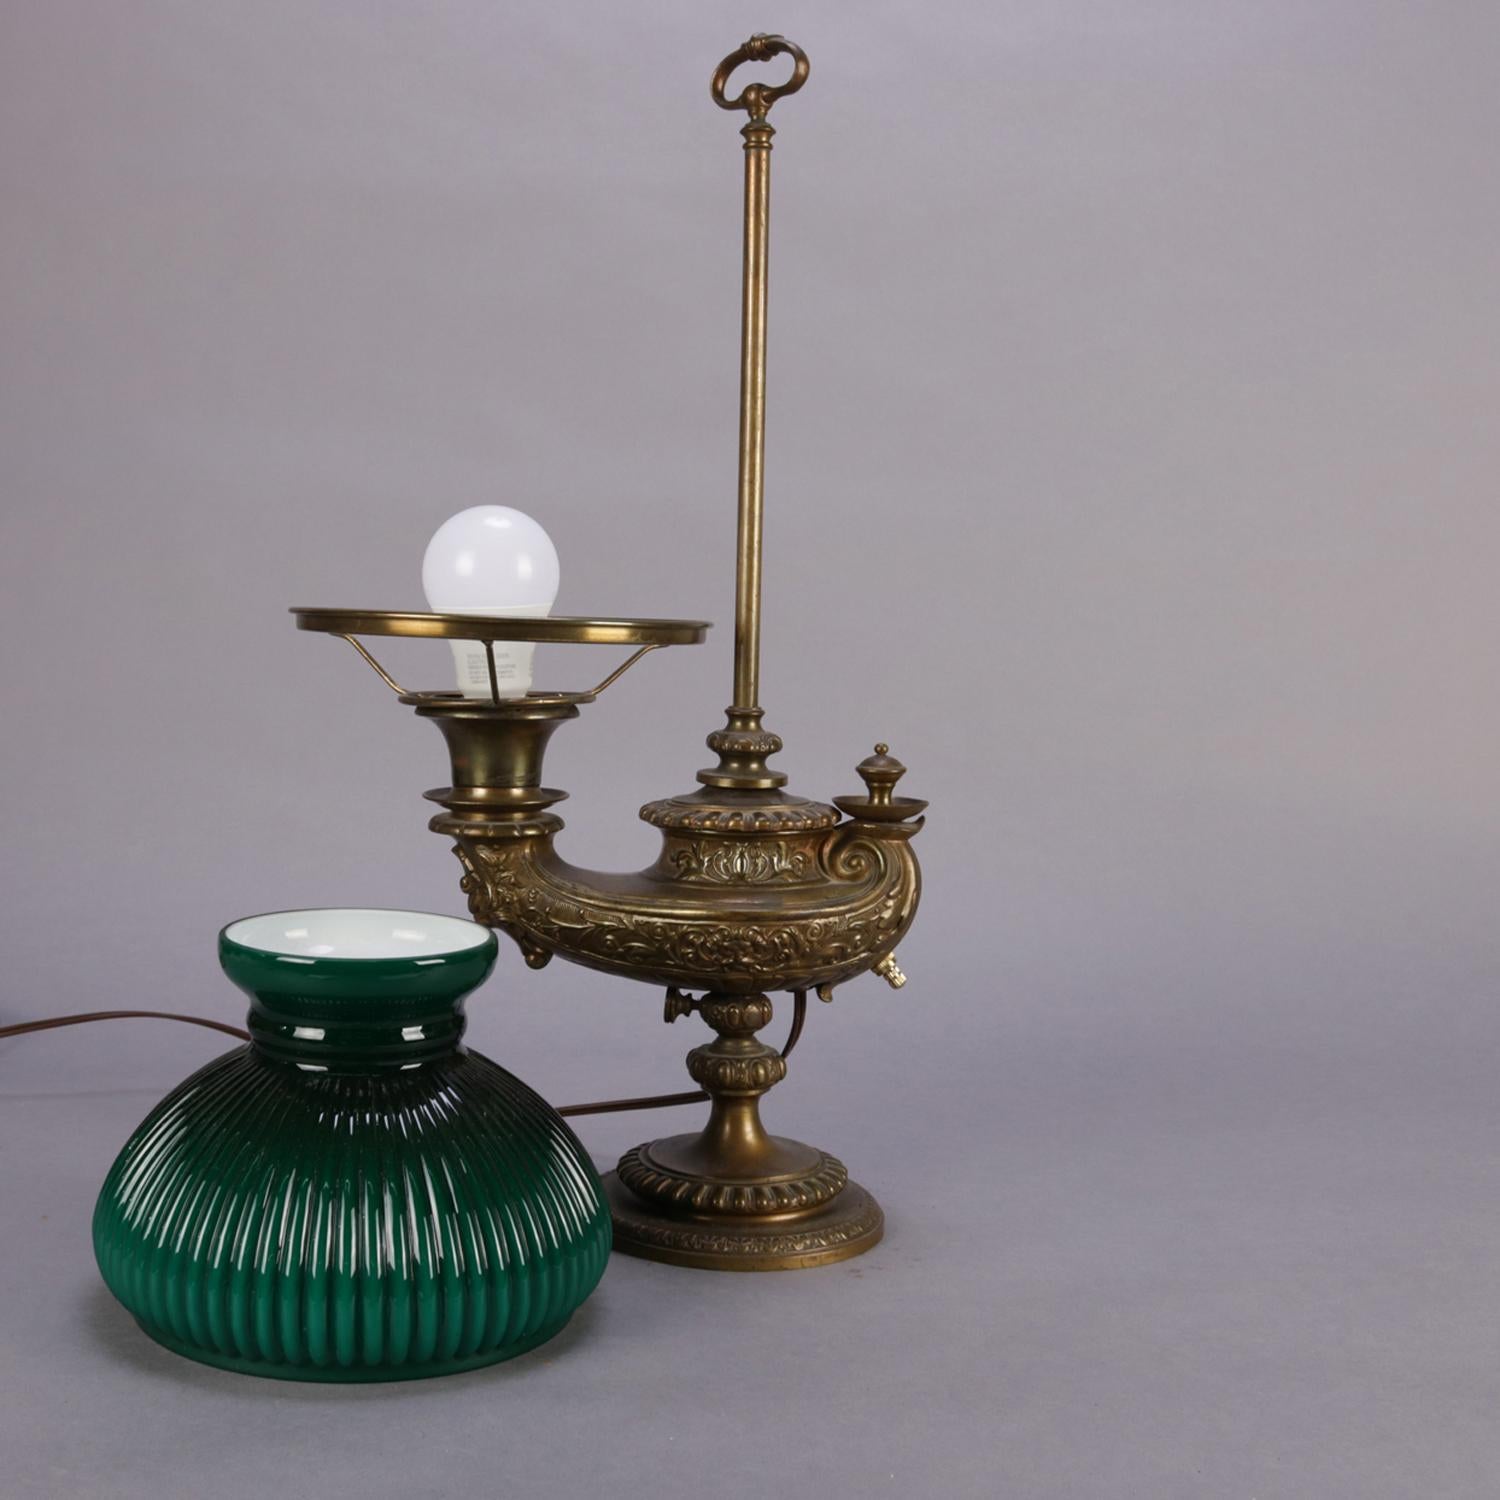 An antique Bradley & Hubbard School student oil lamp features Aladdin lamp form font on adjustable post and having cased glass shade, professionally rewired, circa 1890.

Measures: 21